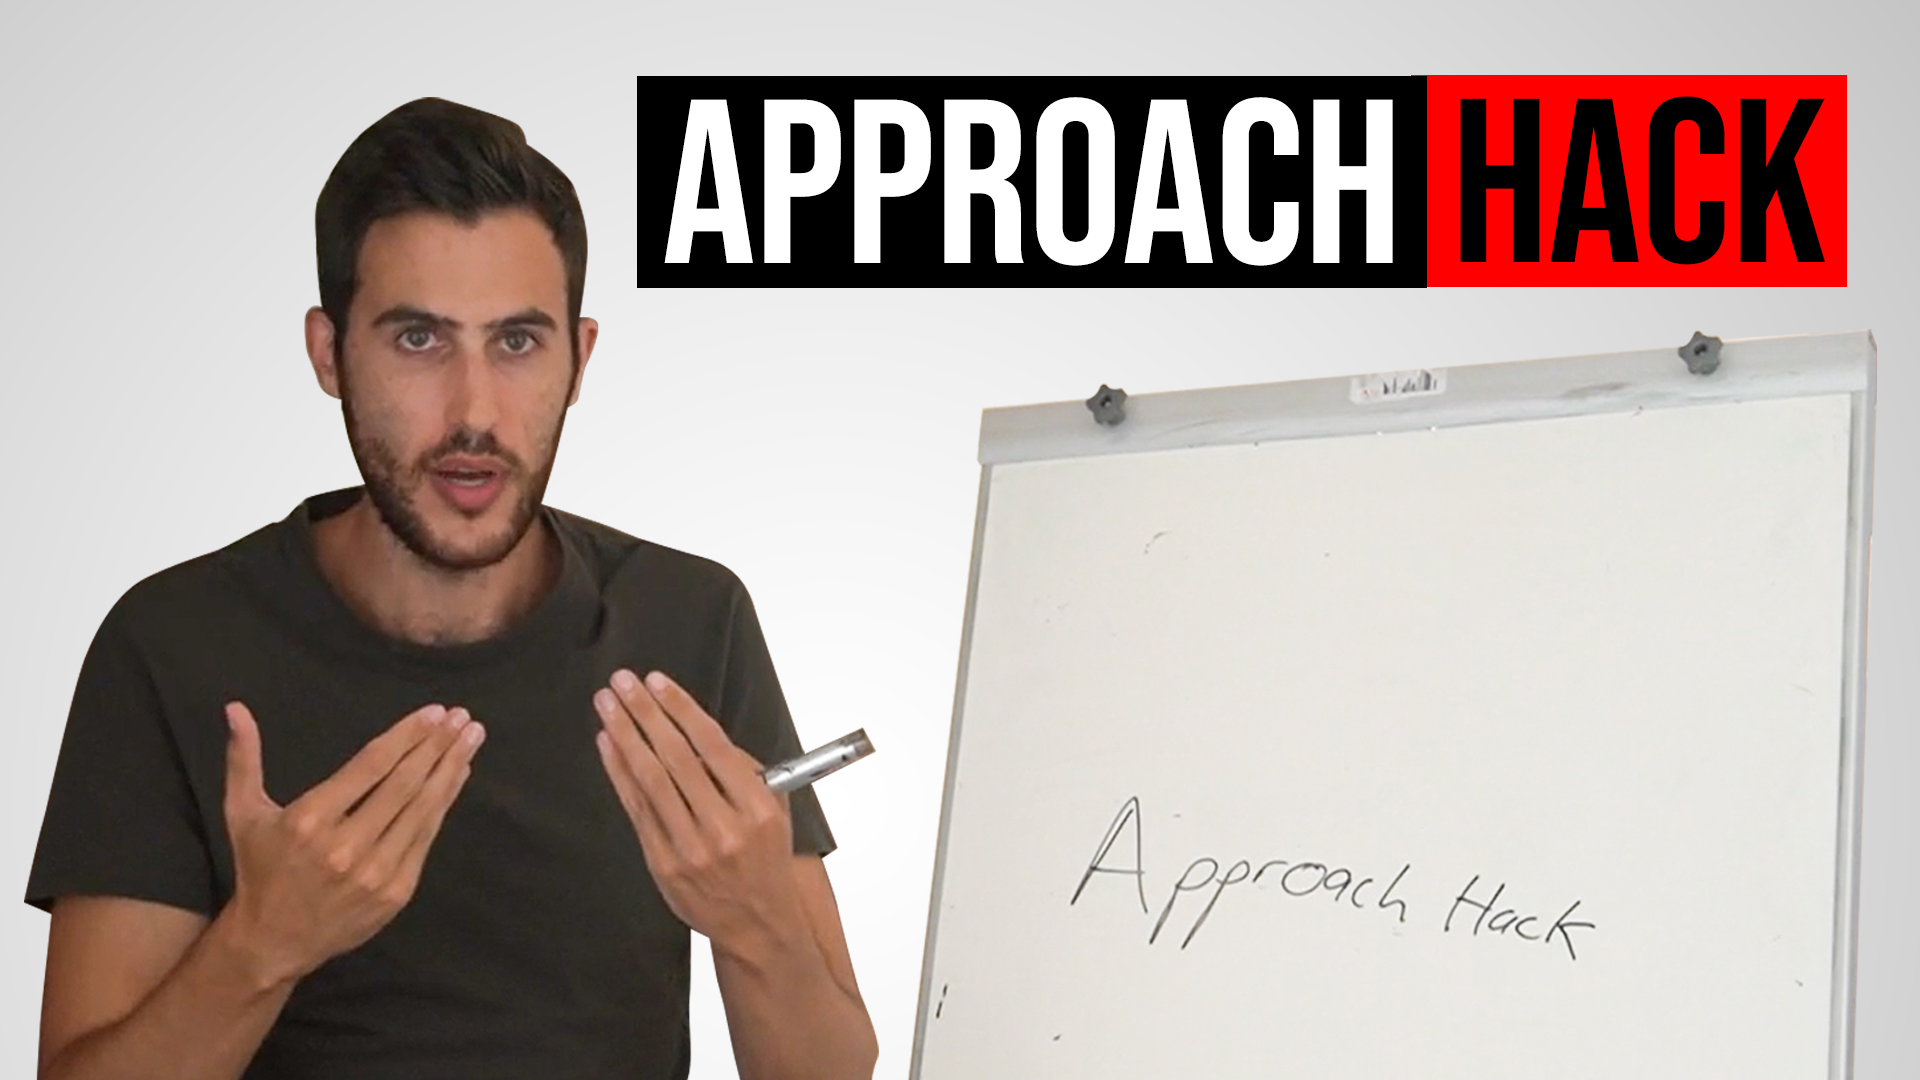 Approach Hack: A simple guaranteed hack to improve your approaches with beautiful women